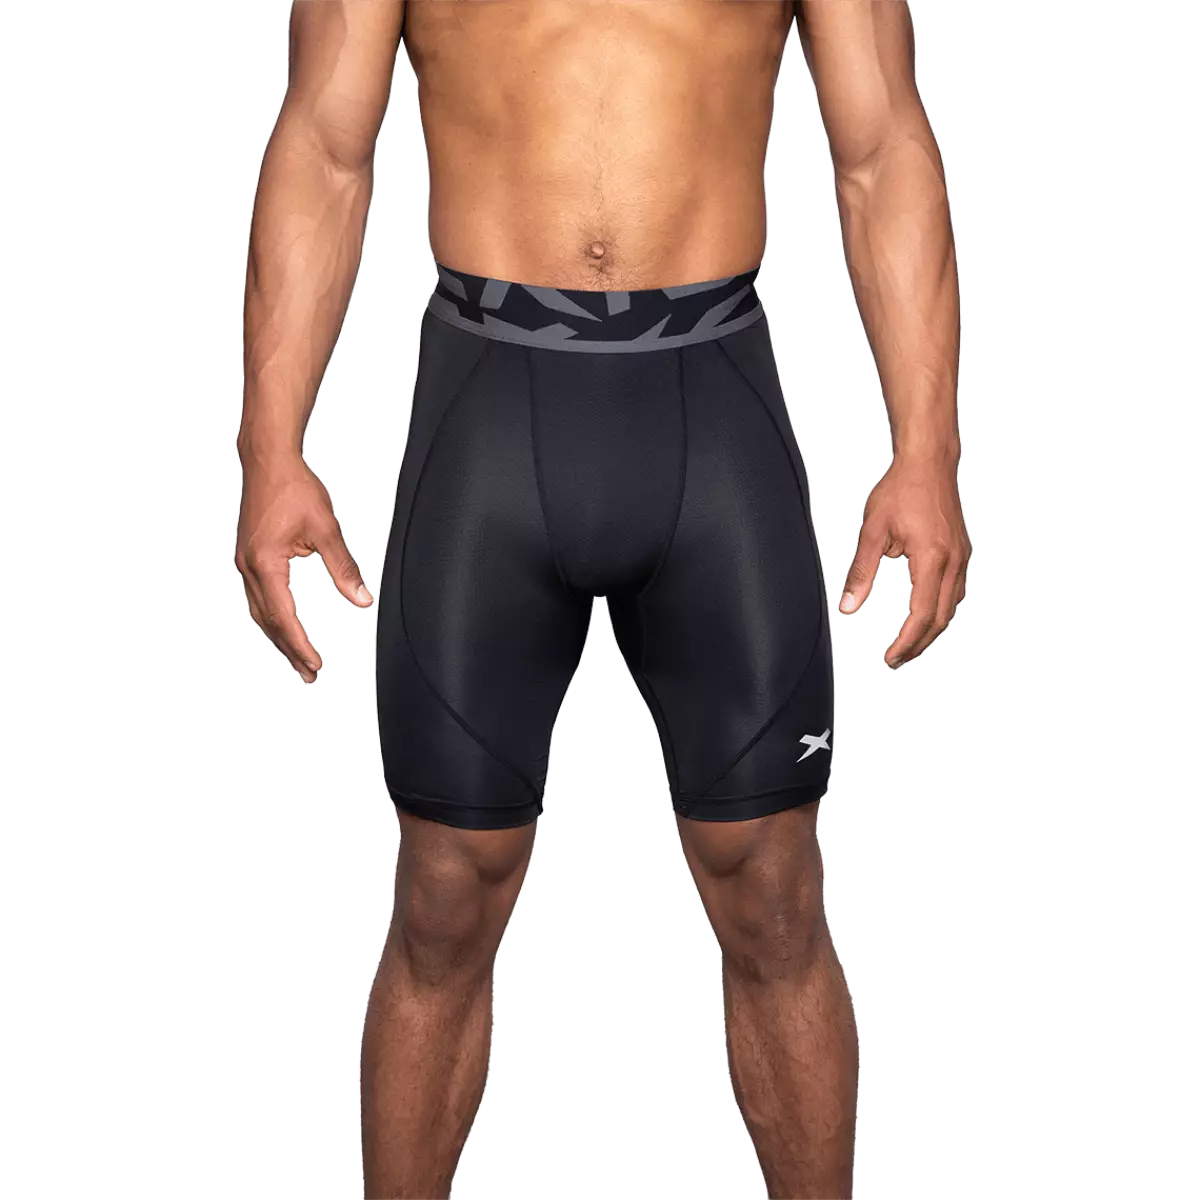 Black compression short on male model, from front.